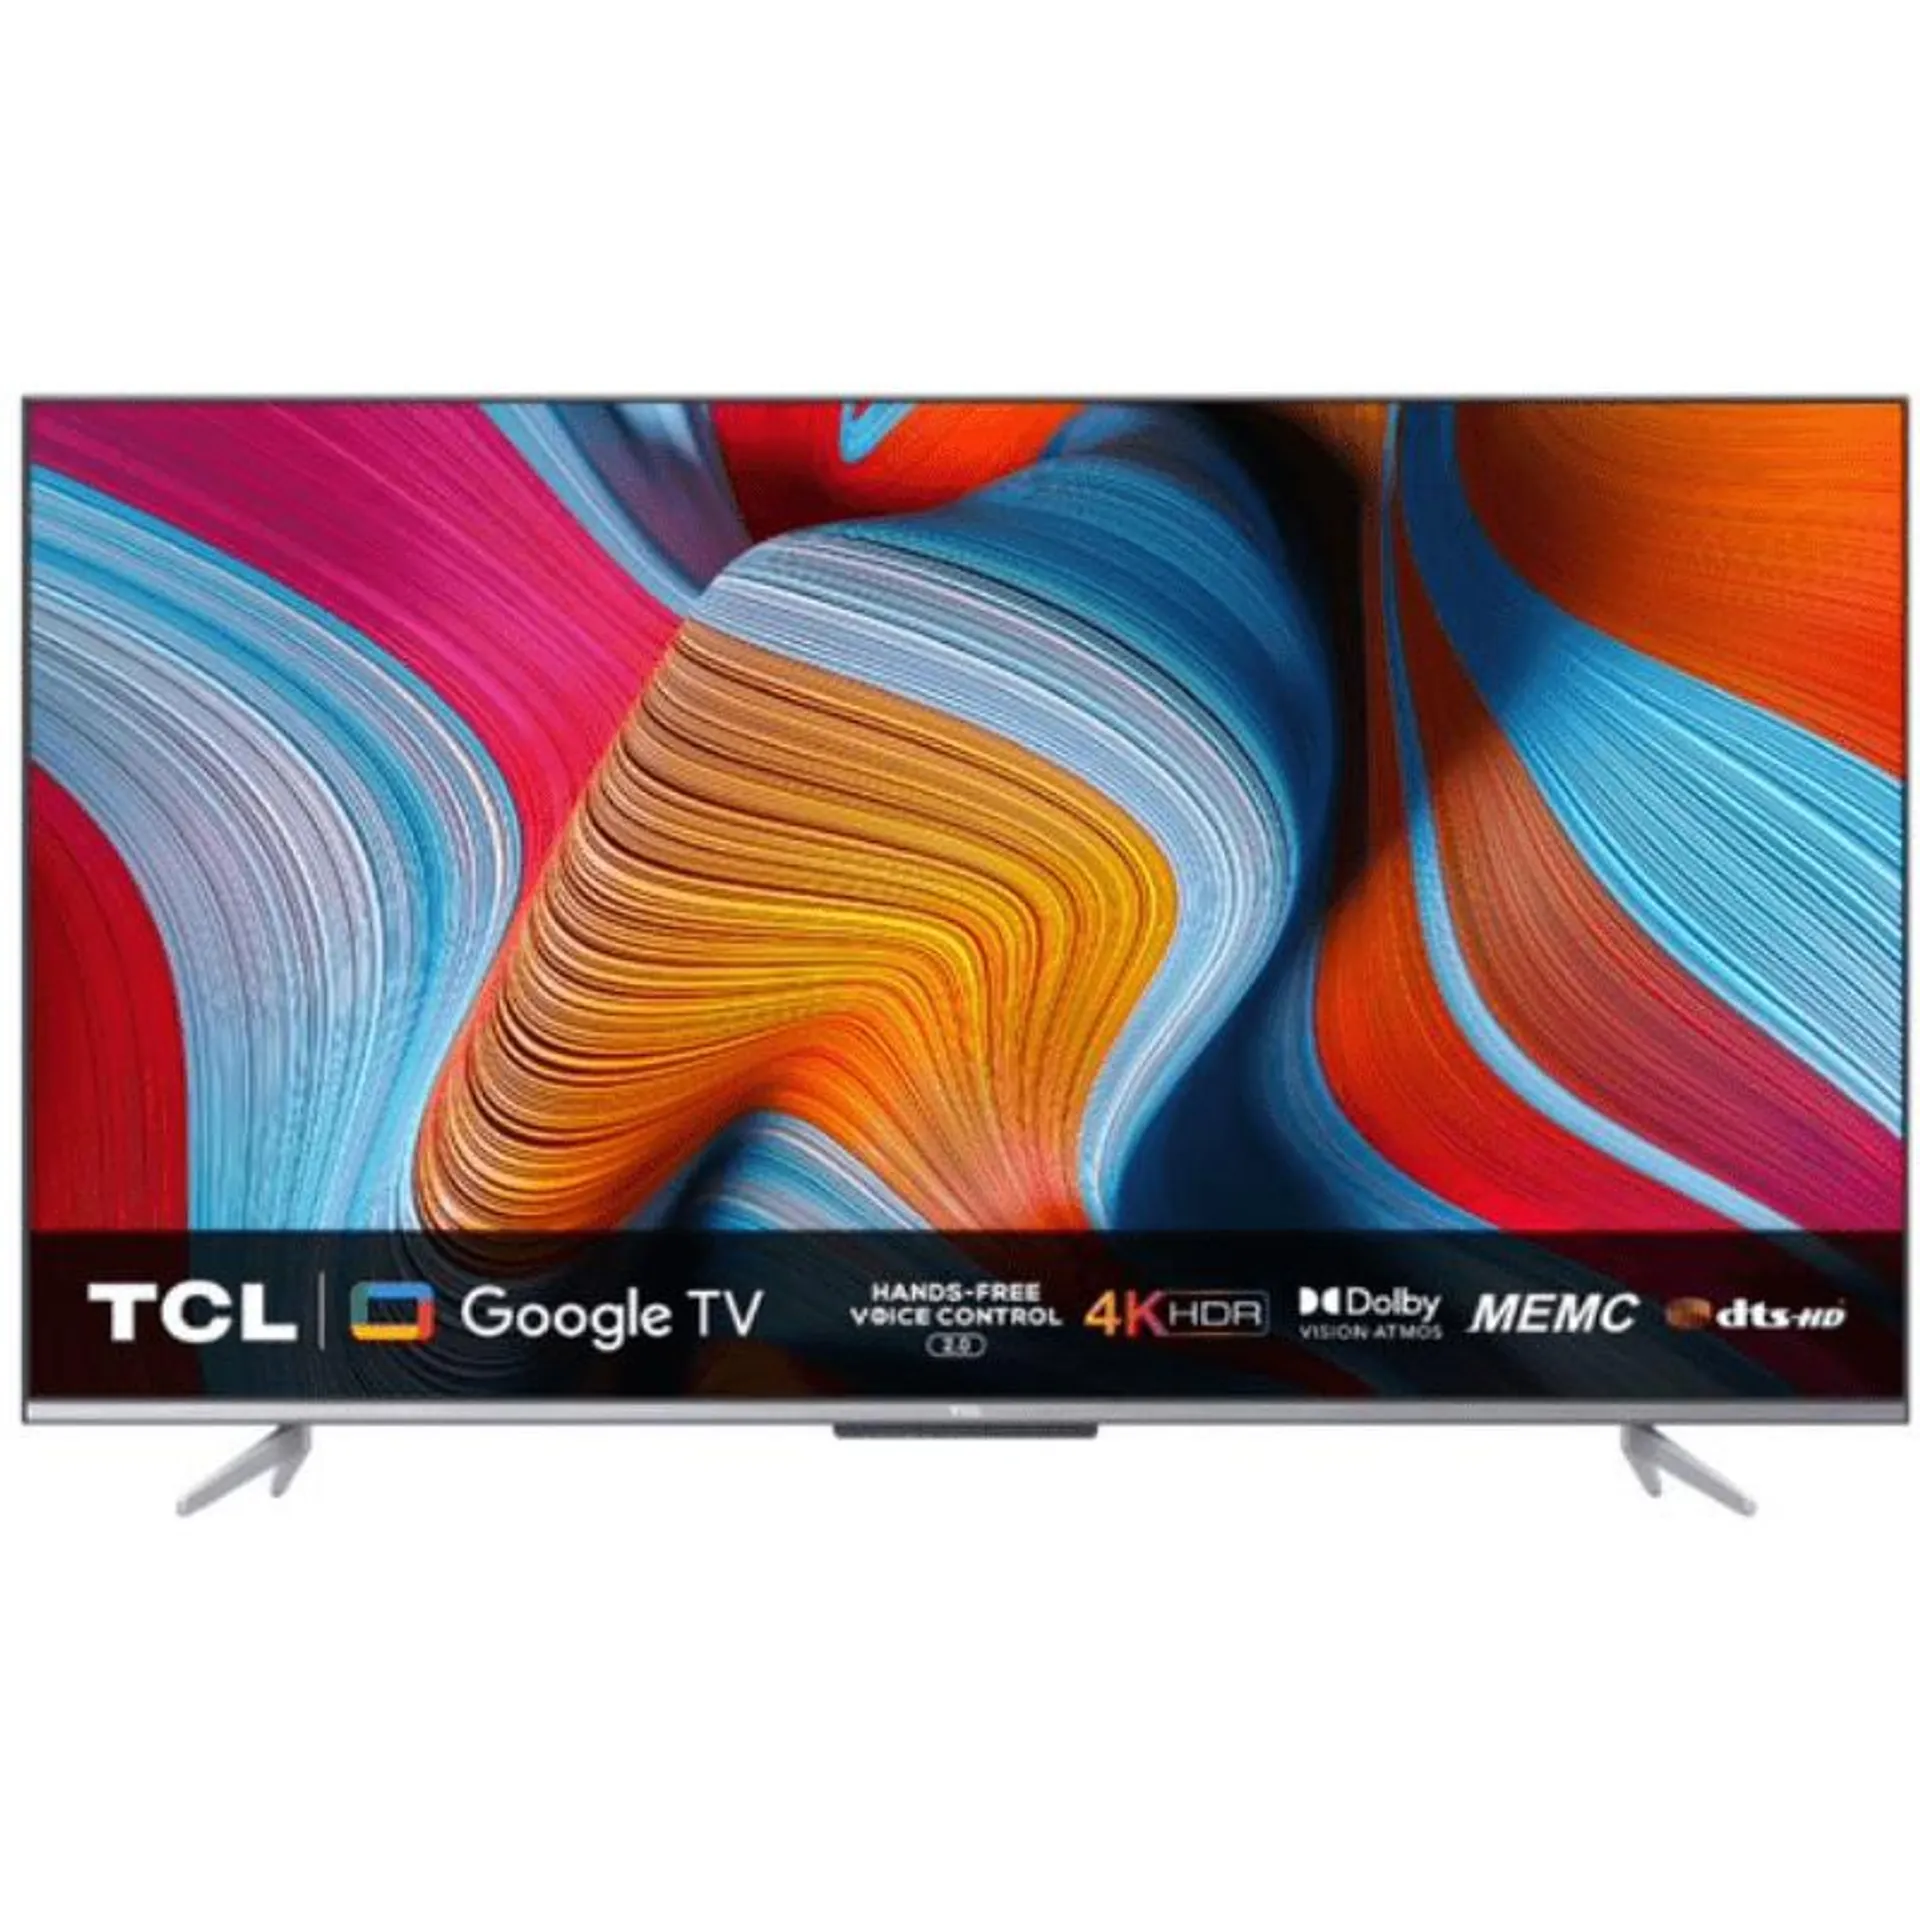 ANDROID TV 50" QLED 4K ULTRA HD L50P725